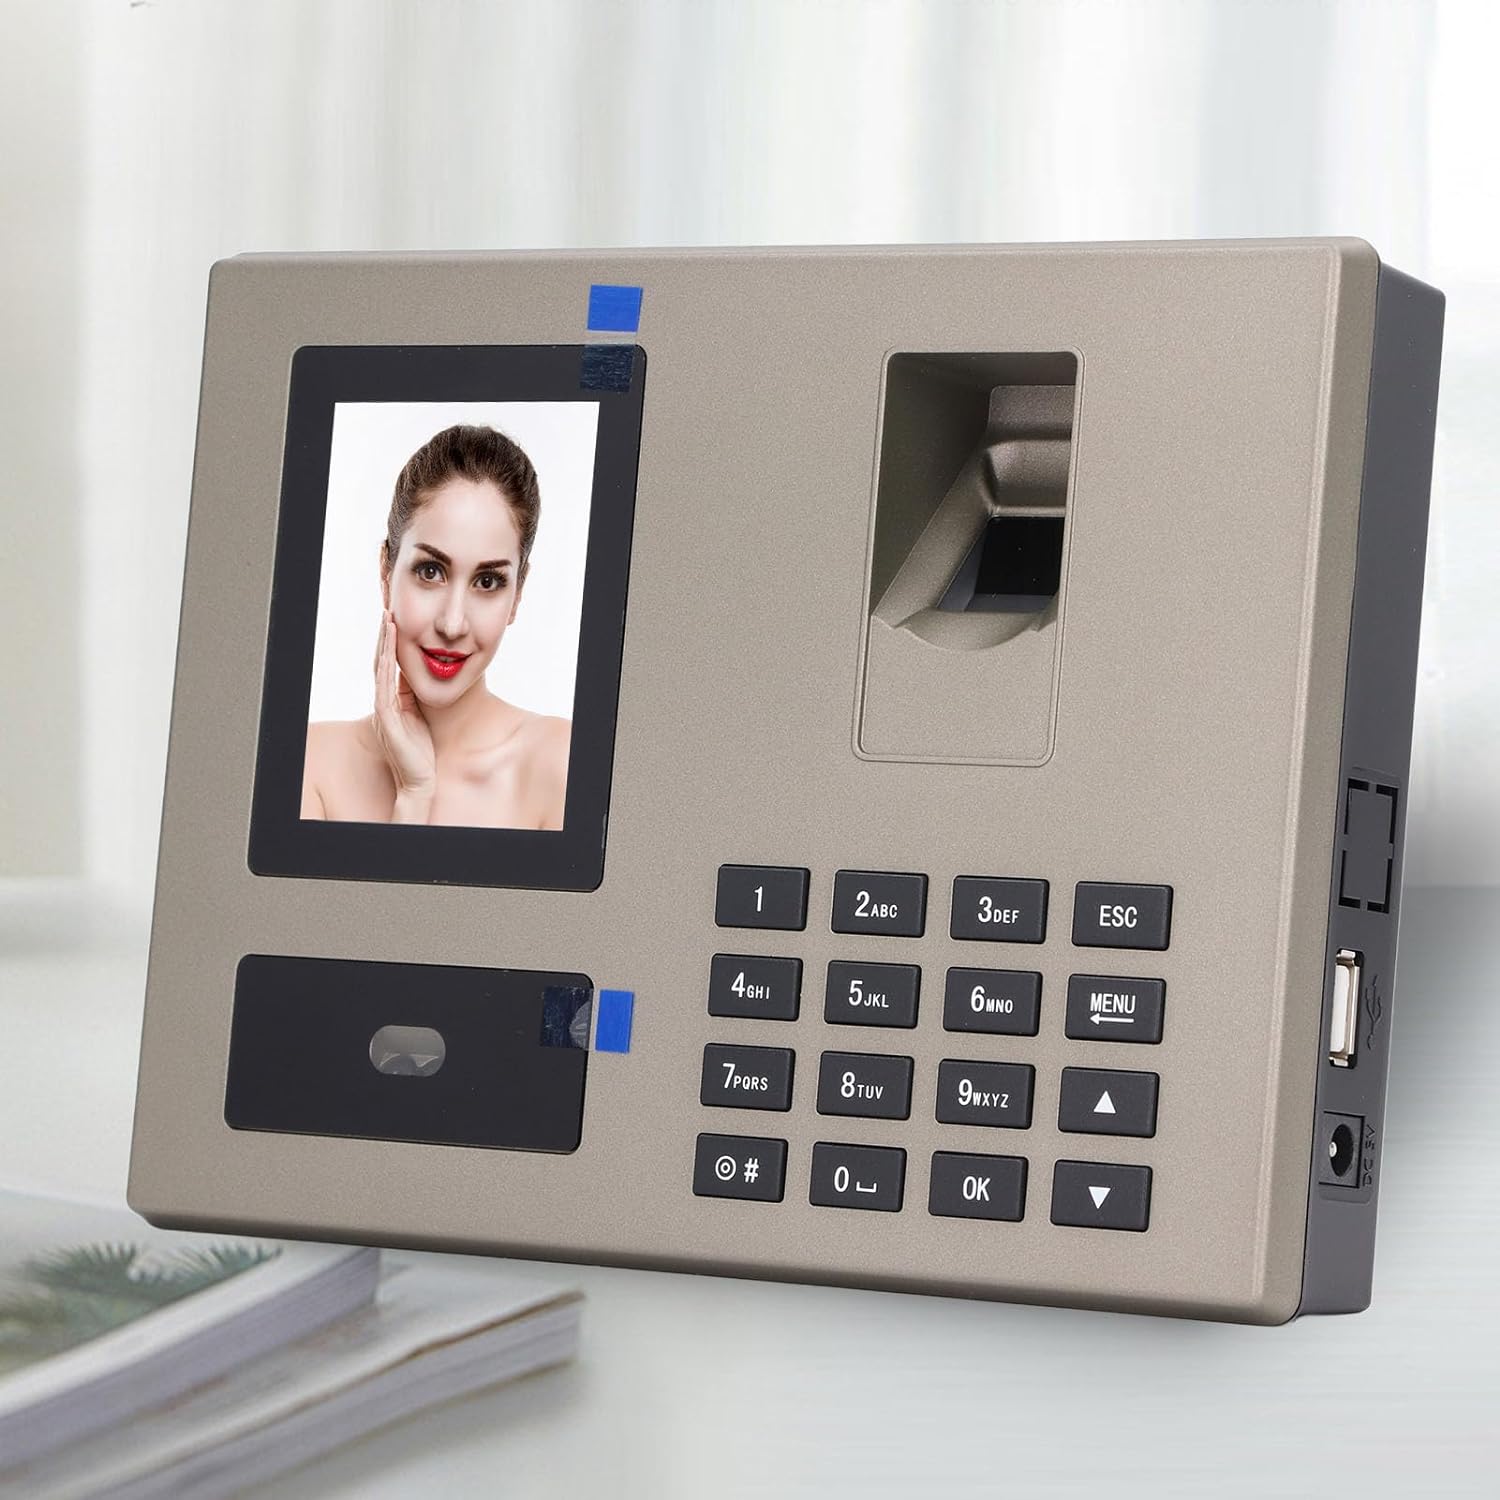 100-240V Employee Attendance Machine Face Biometric Point Attendance Machine Hot Voice PIN Punching for Office (US Plug)